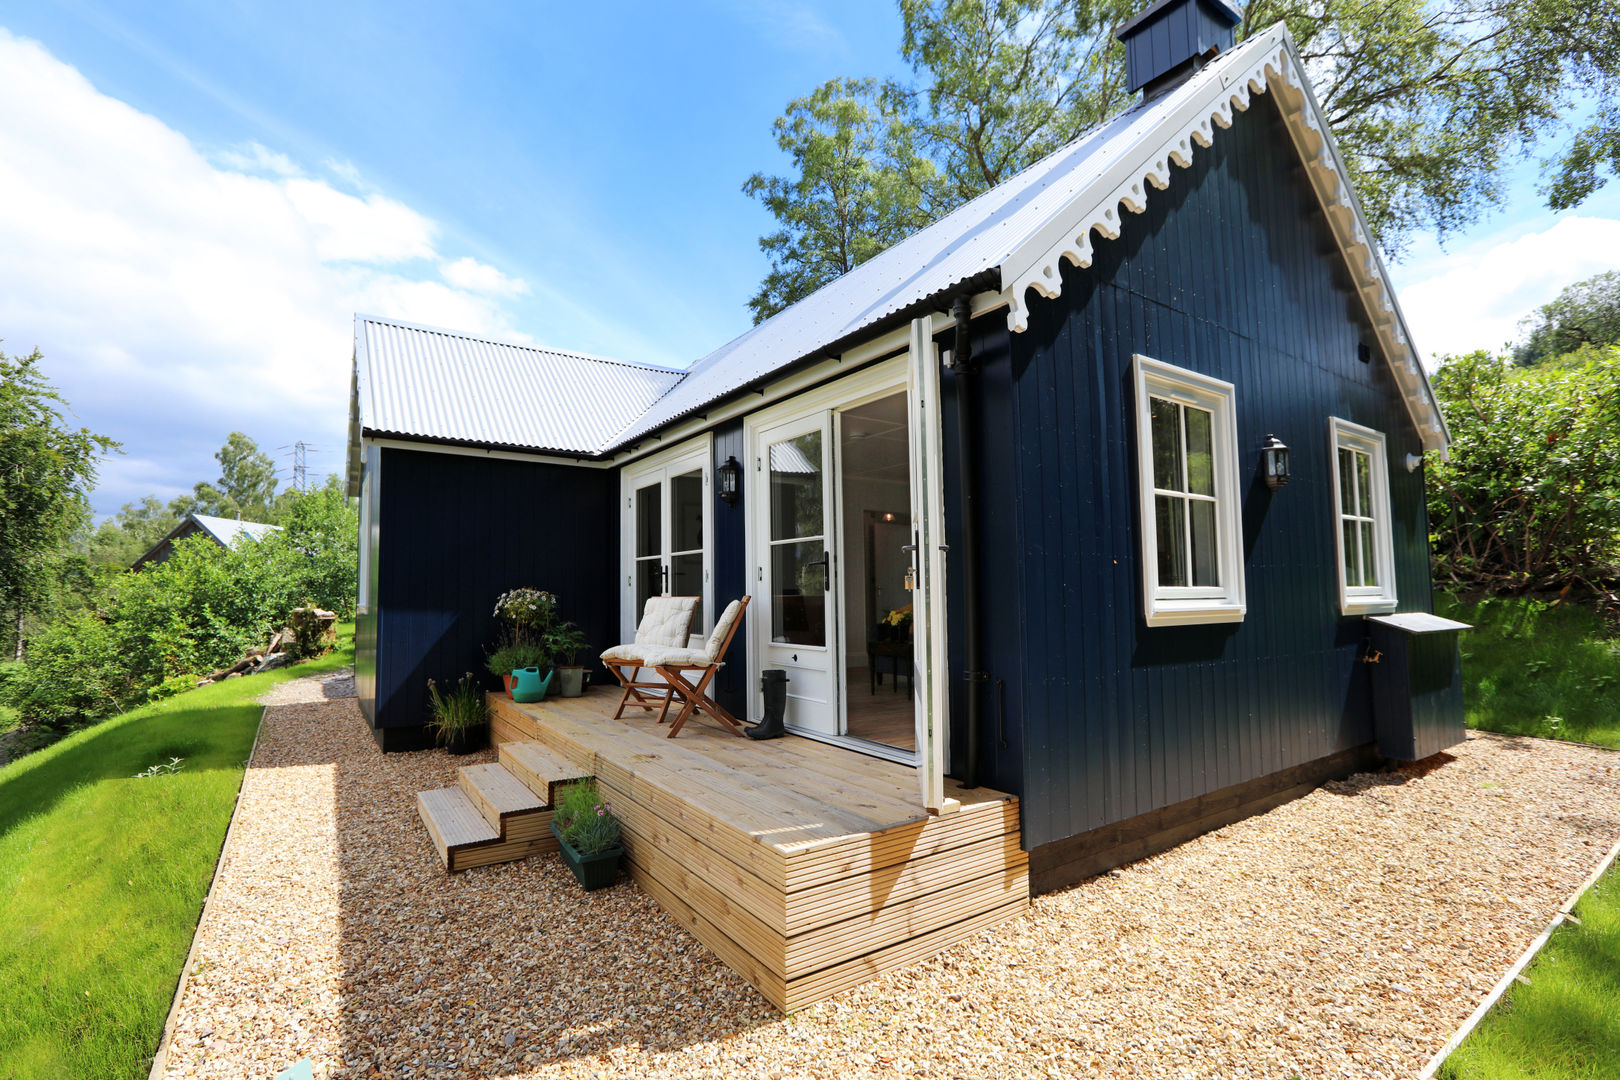 Two Bedroom Bespoke Wee House , The Wee House Company The Wee House Company Patios & Decks